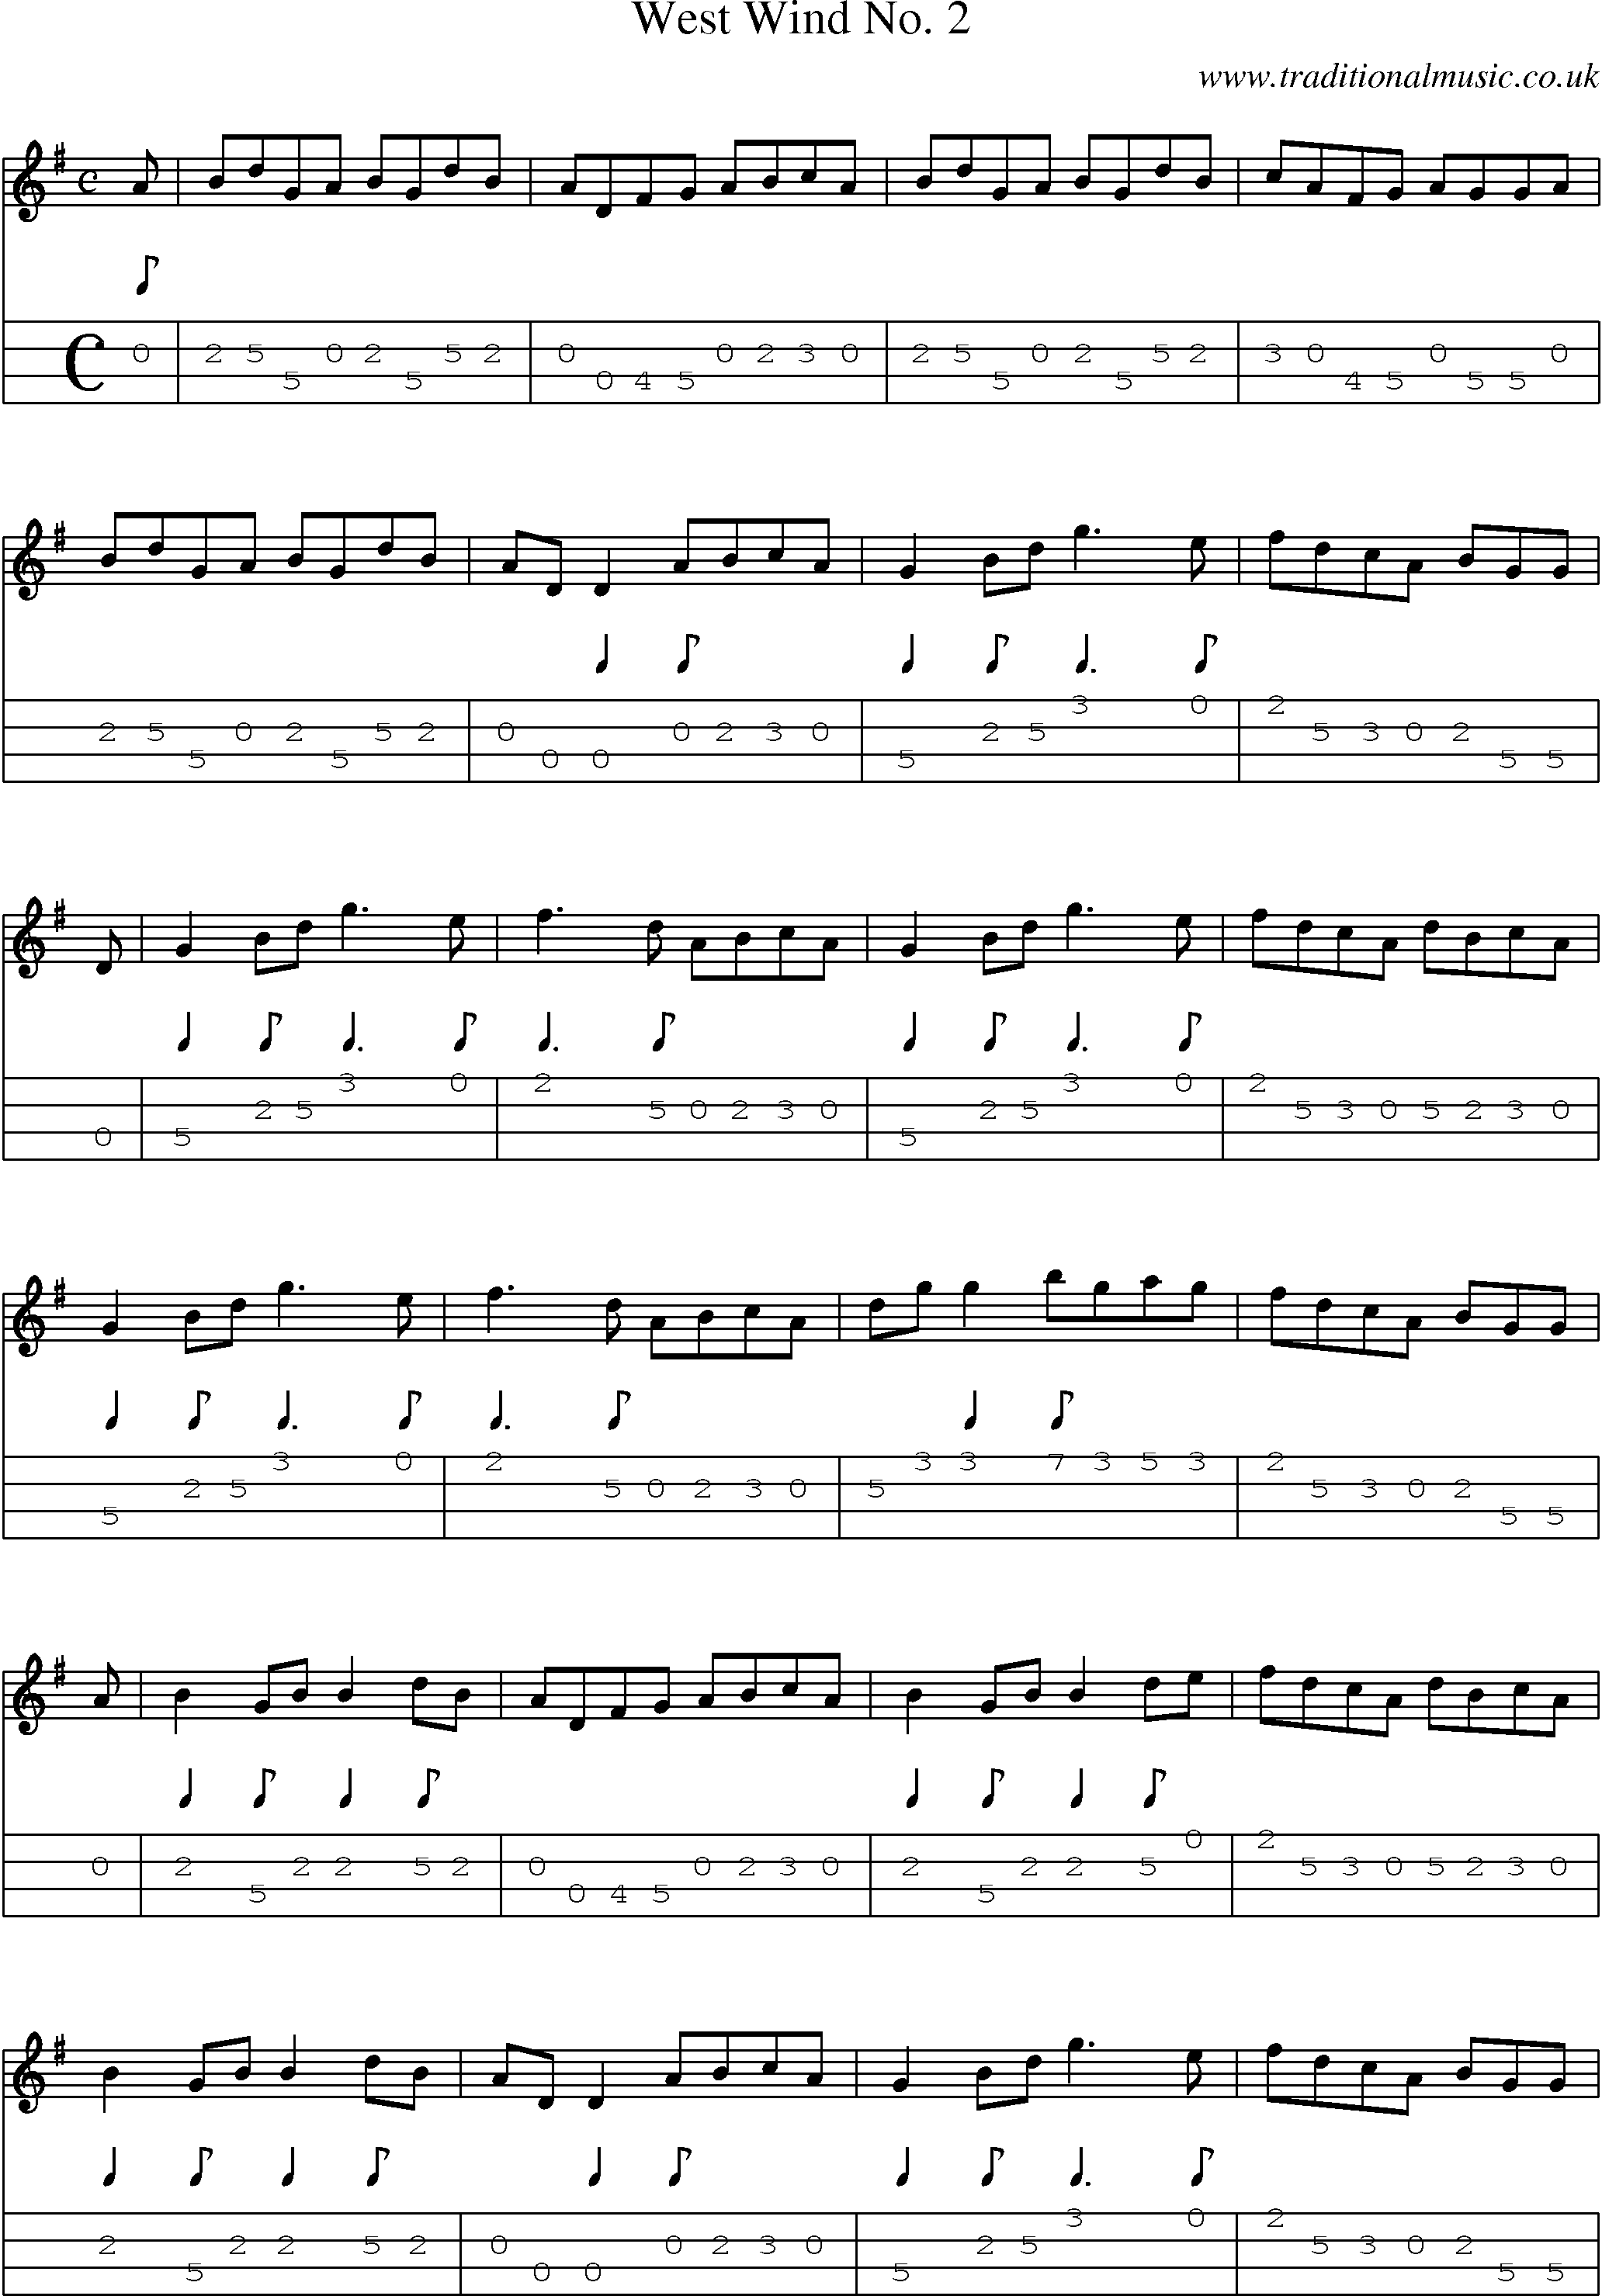 Music Score and Mandolin Tabs for West Wind No 2